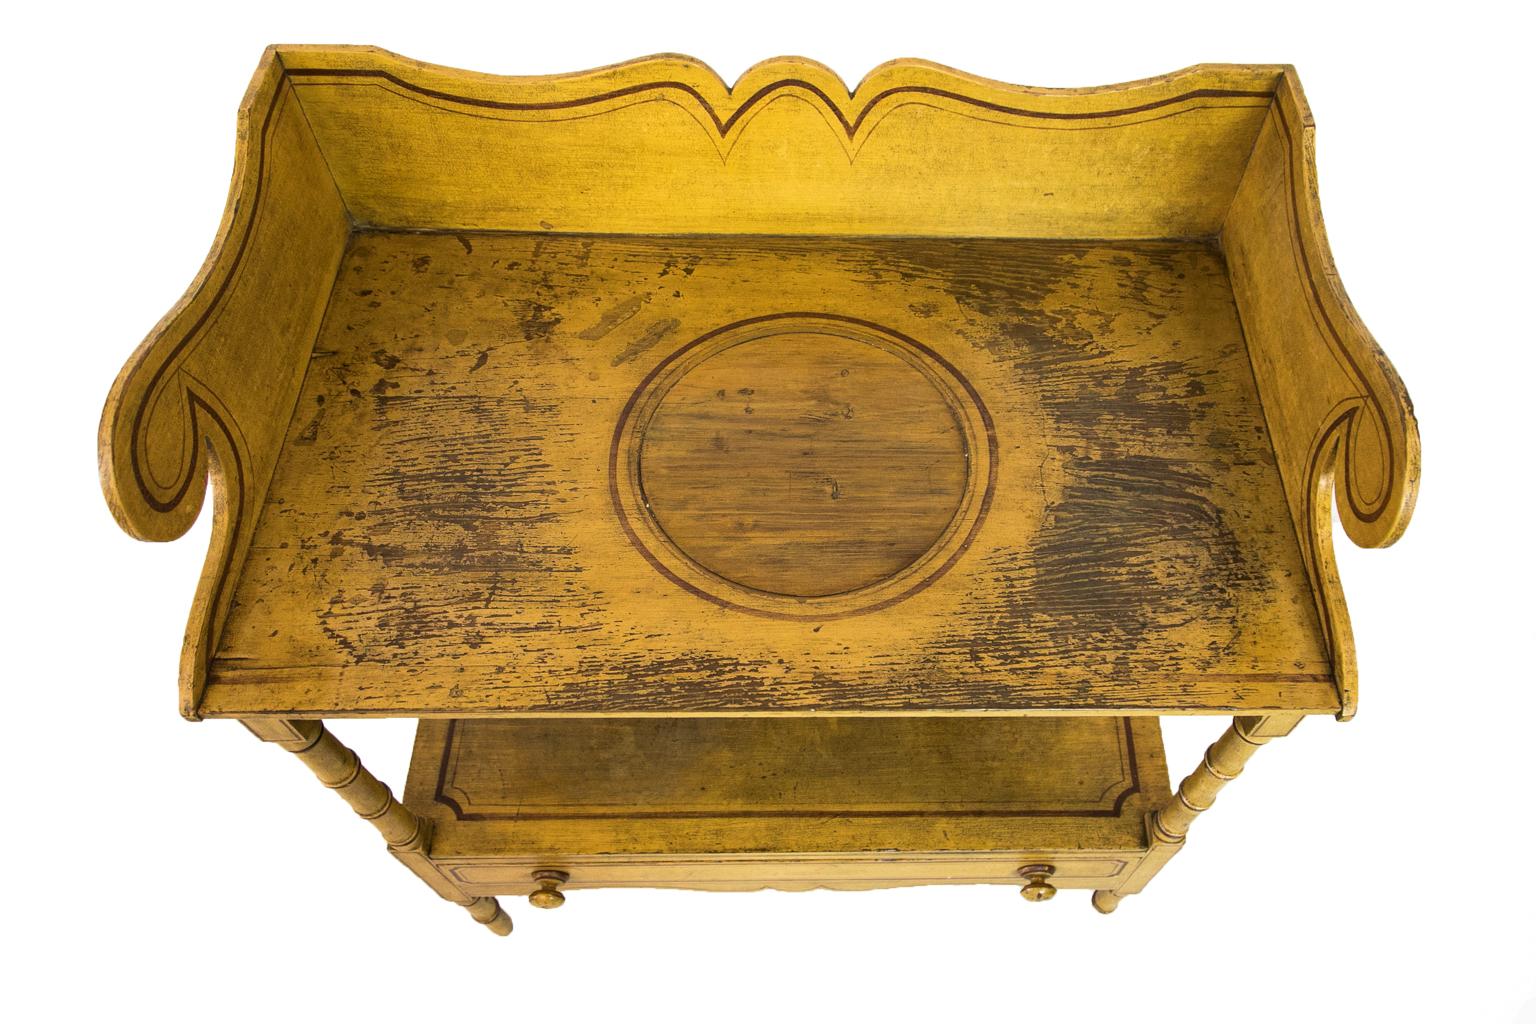 This painted one drawer faux bamboo table has a shaped gallery on three sides. The top has well weathered paint. The center hole, which originally held the wash basin, has been filled with wood to blend in with the rest of the top. The top, back